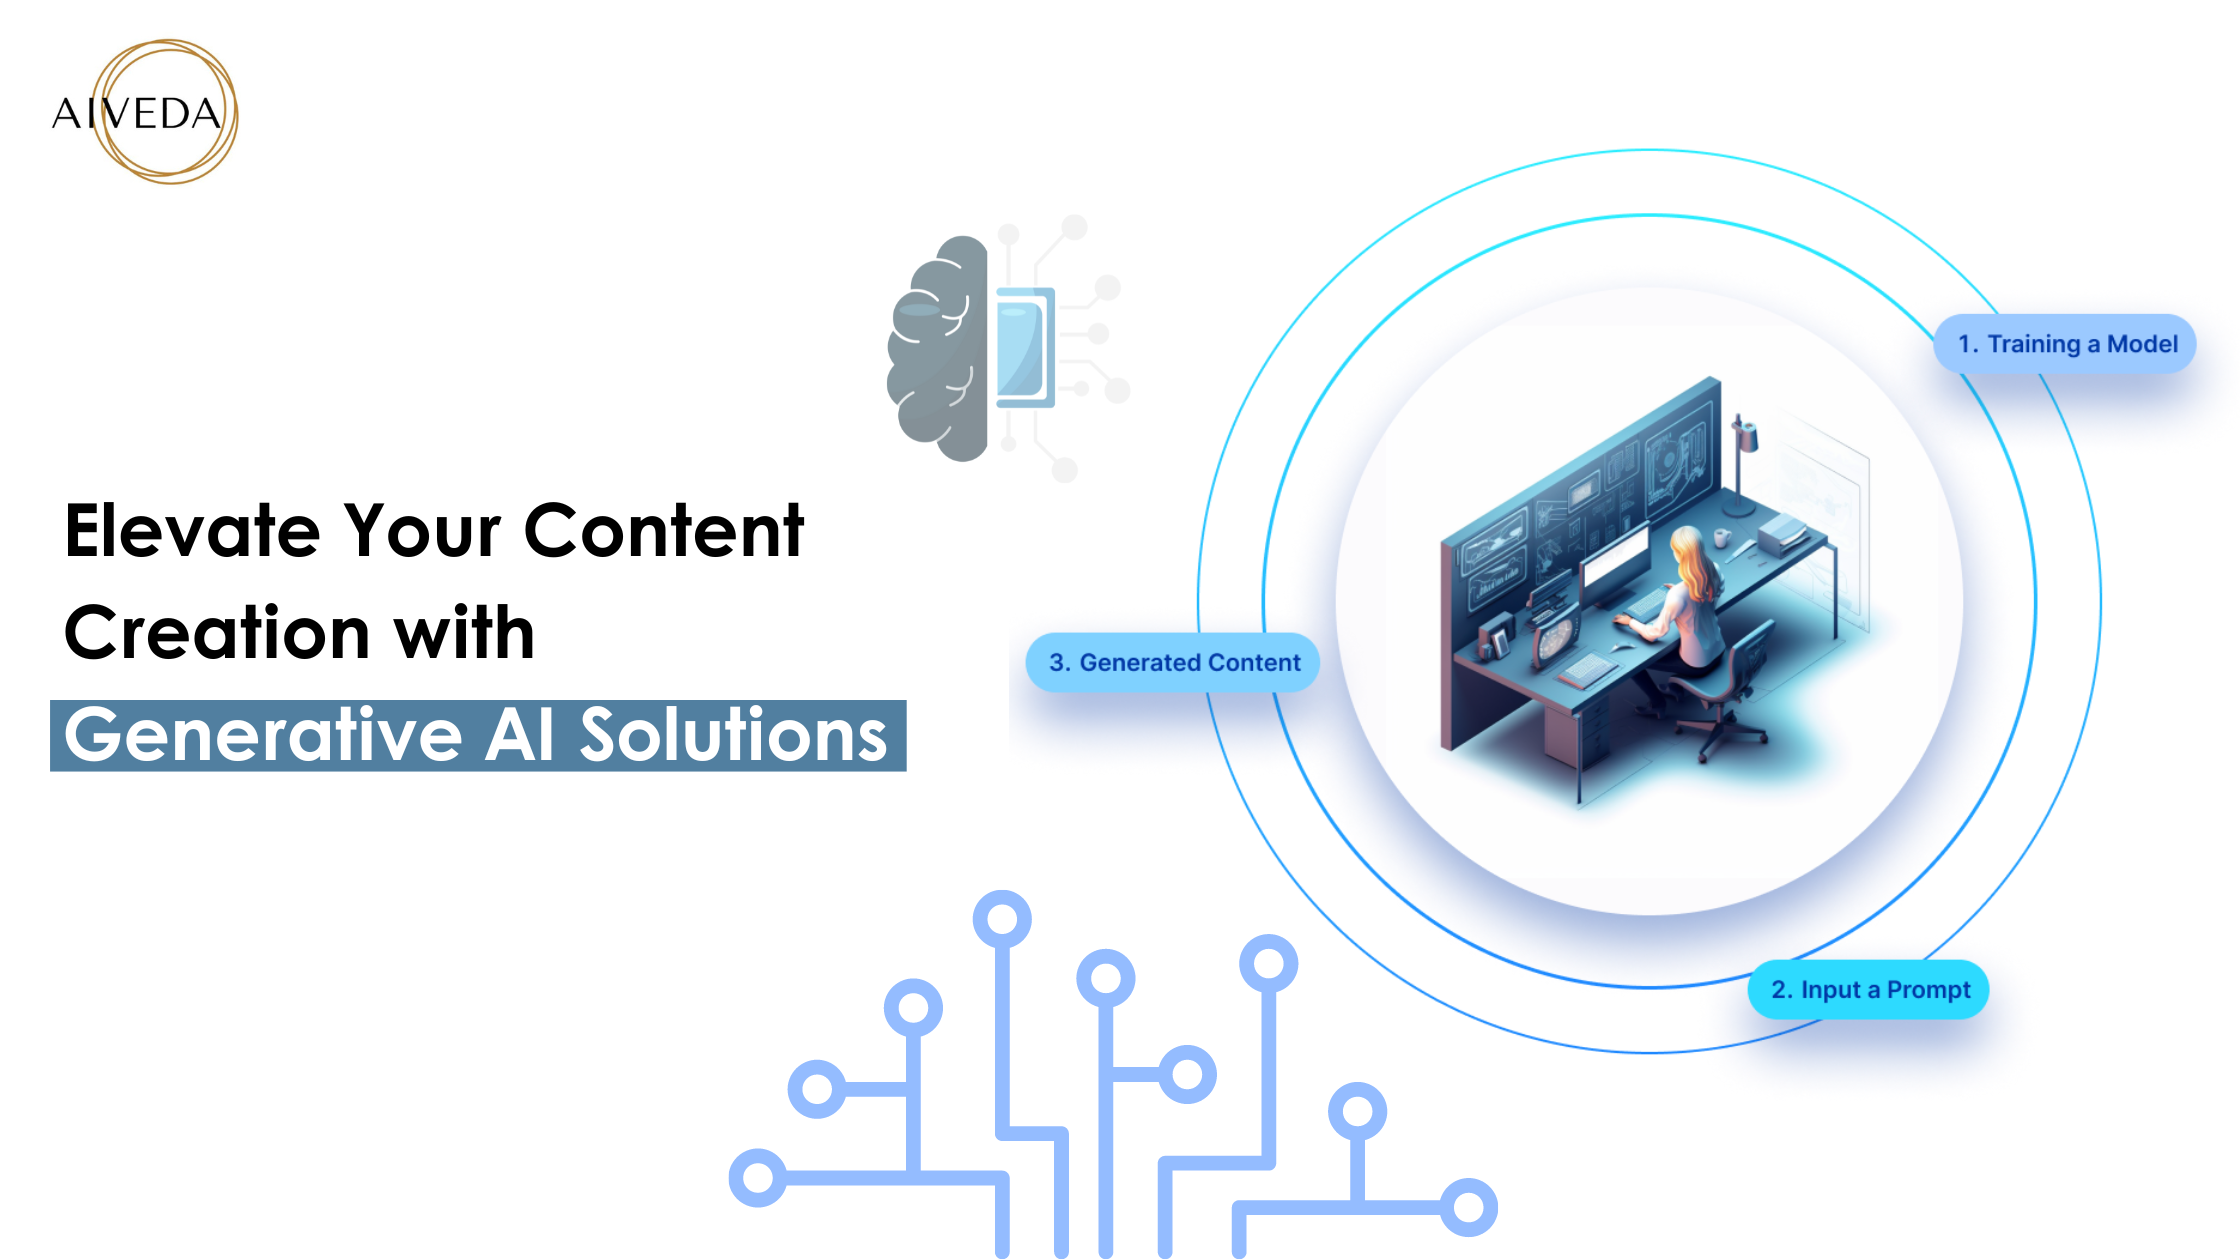 Elevate Your Content Creation With Generative AI Solutions